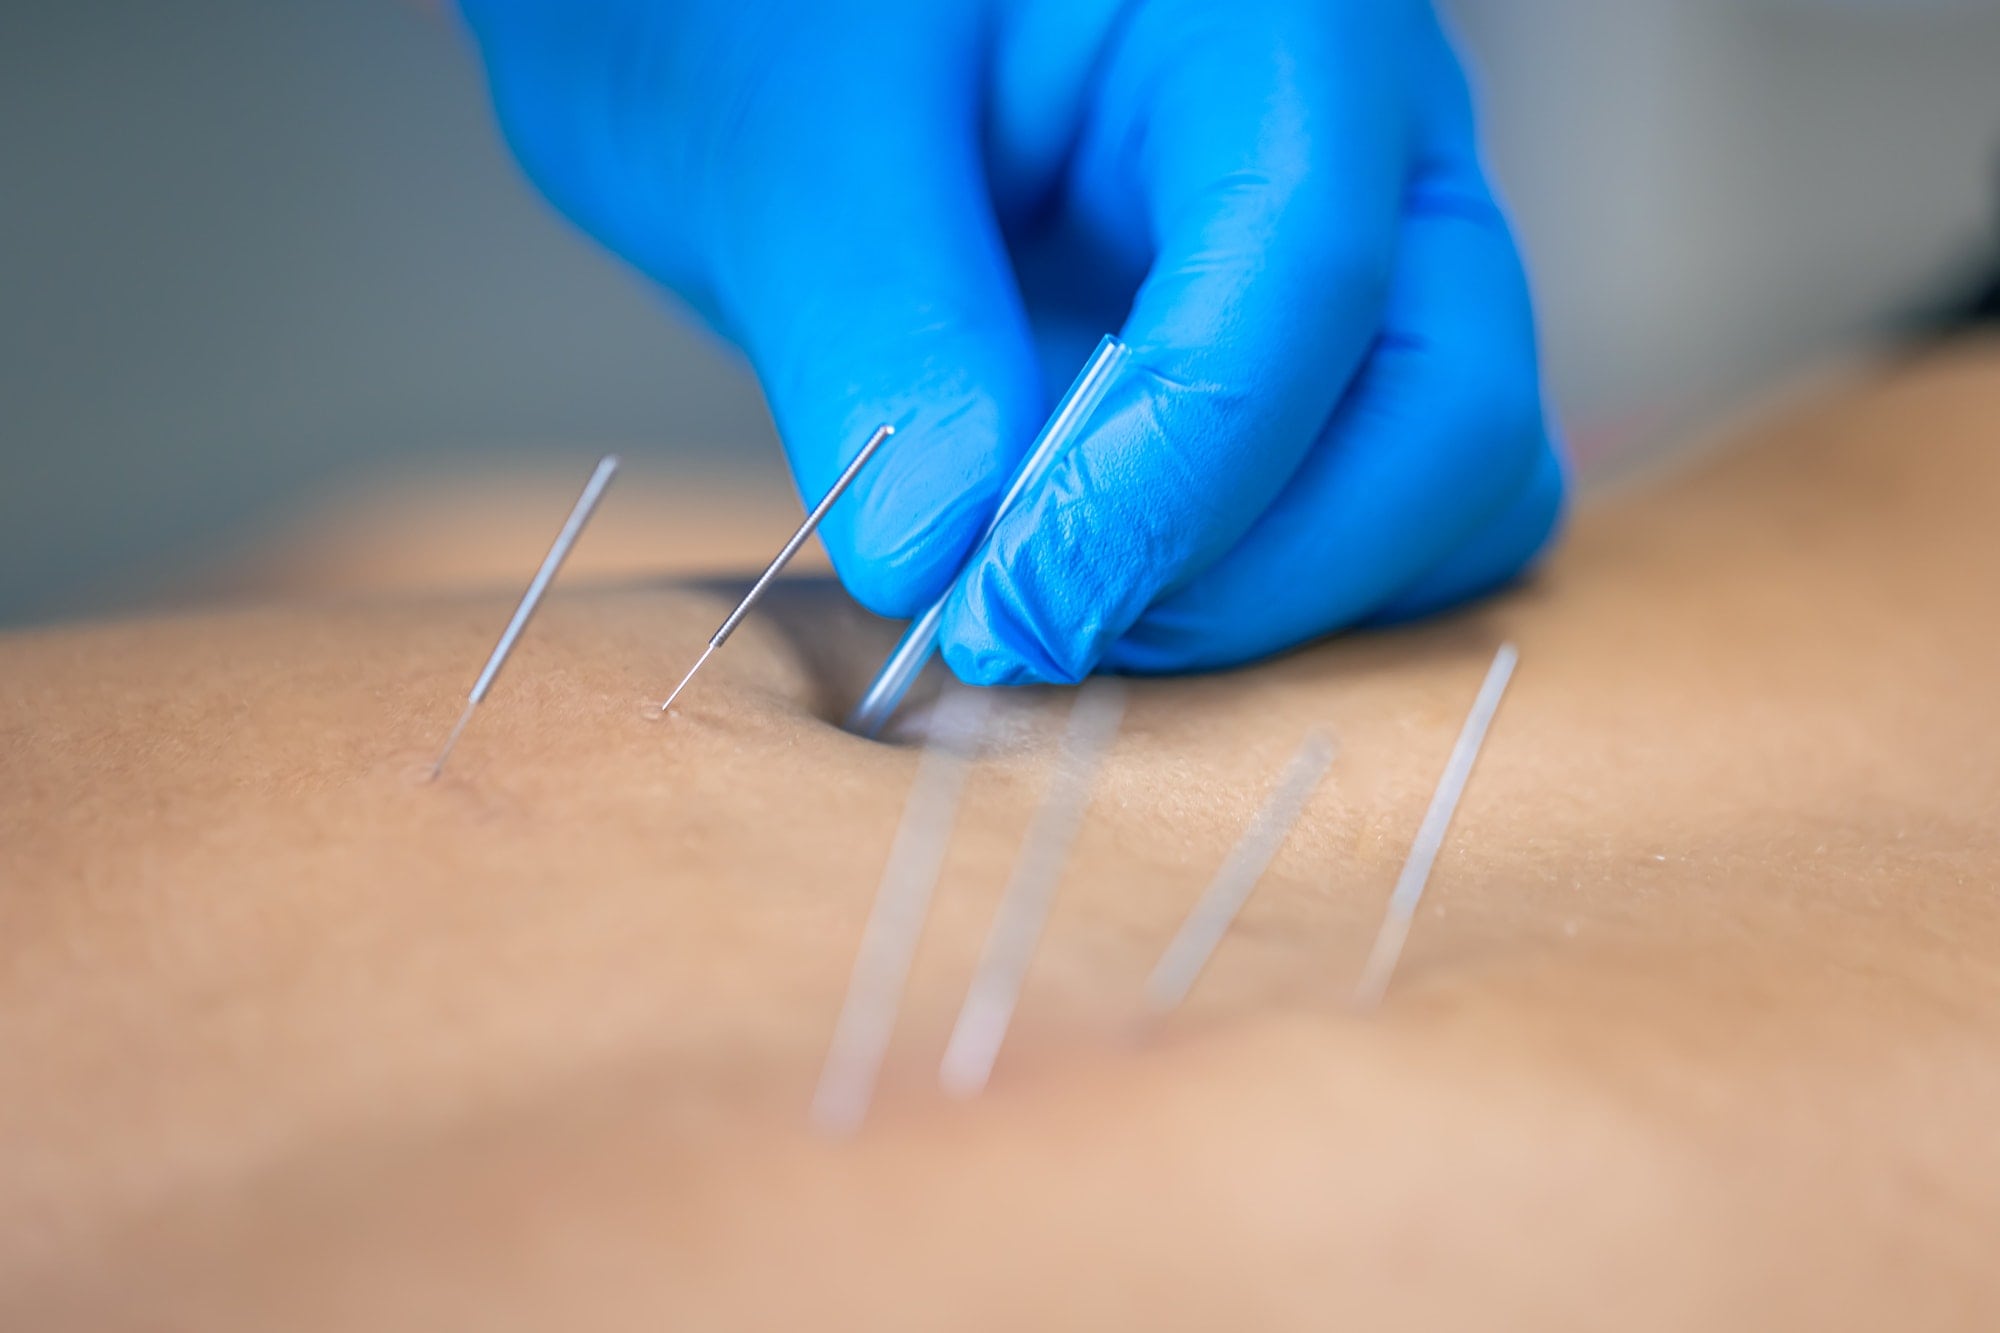 Close up of a needle and hands of physiotherapist doing a dry needling.